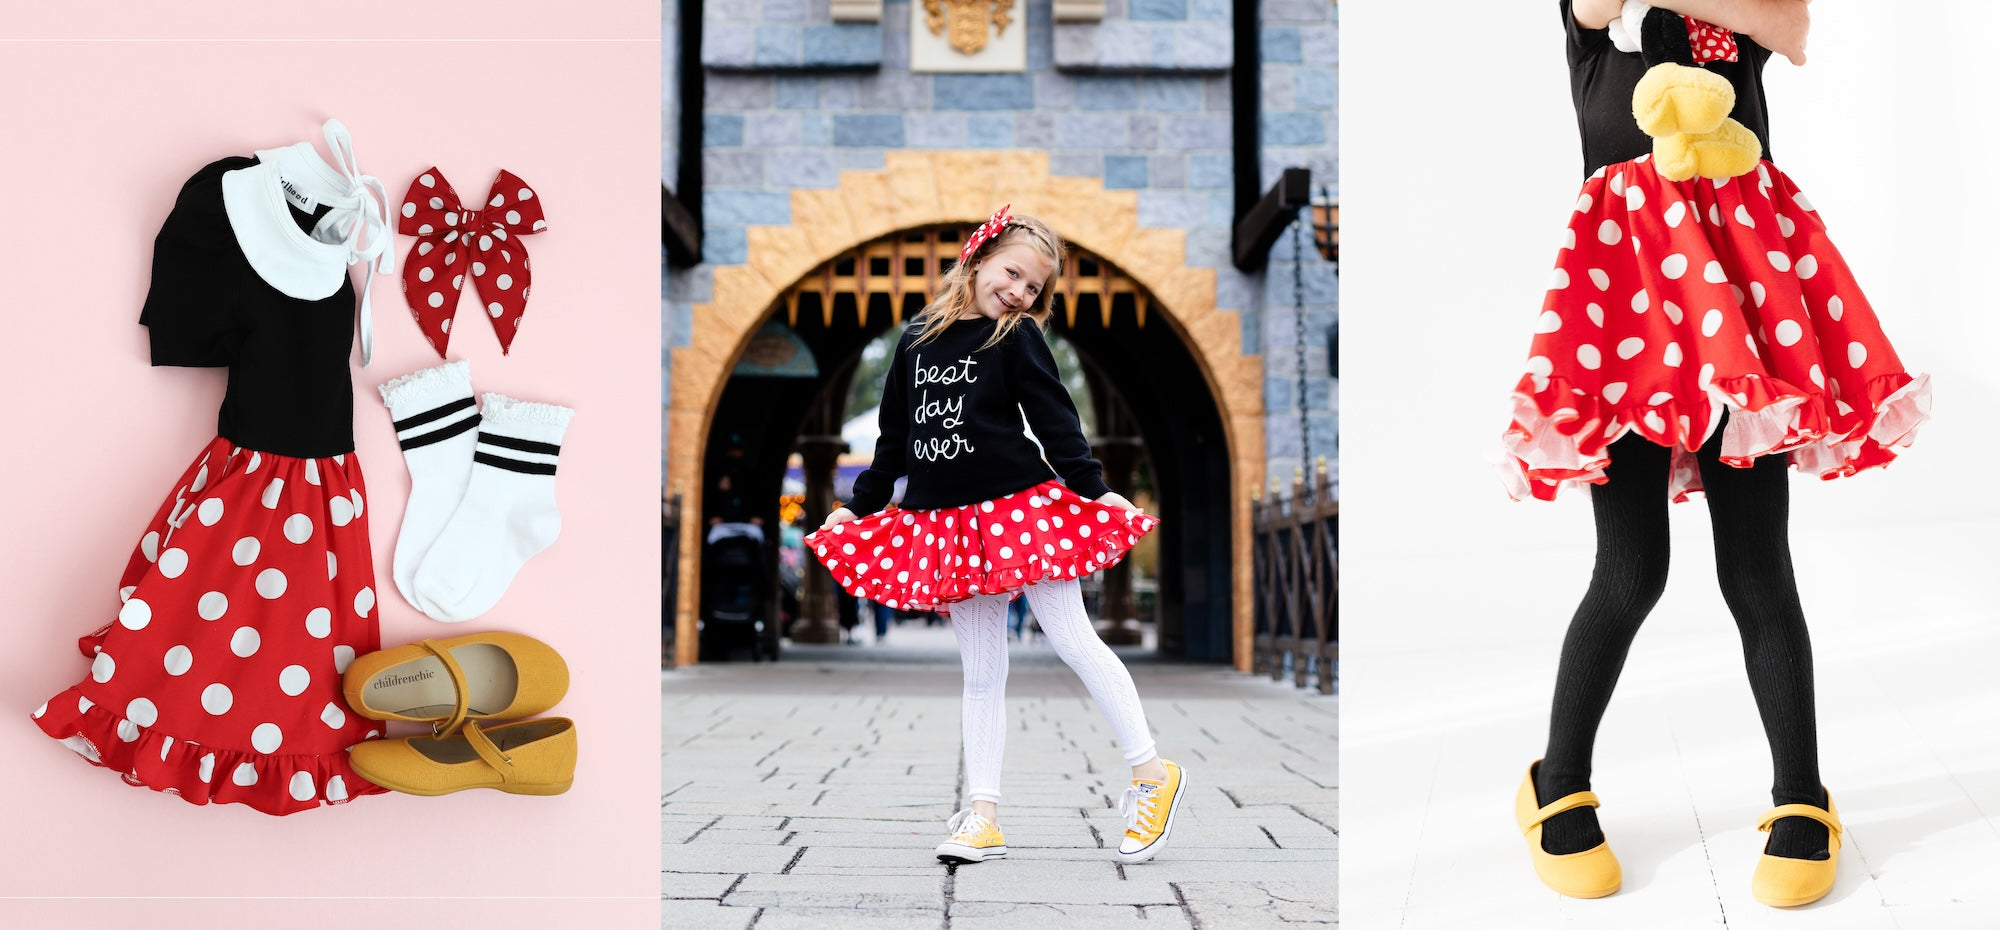 Toddler White Minnie Mouse Tights - Mickey and Friends 